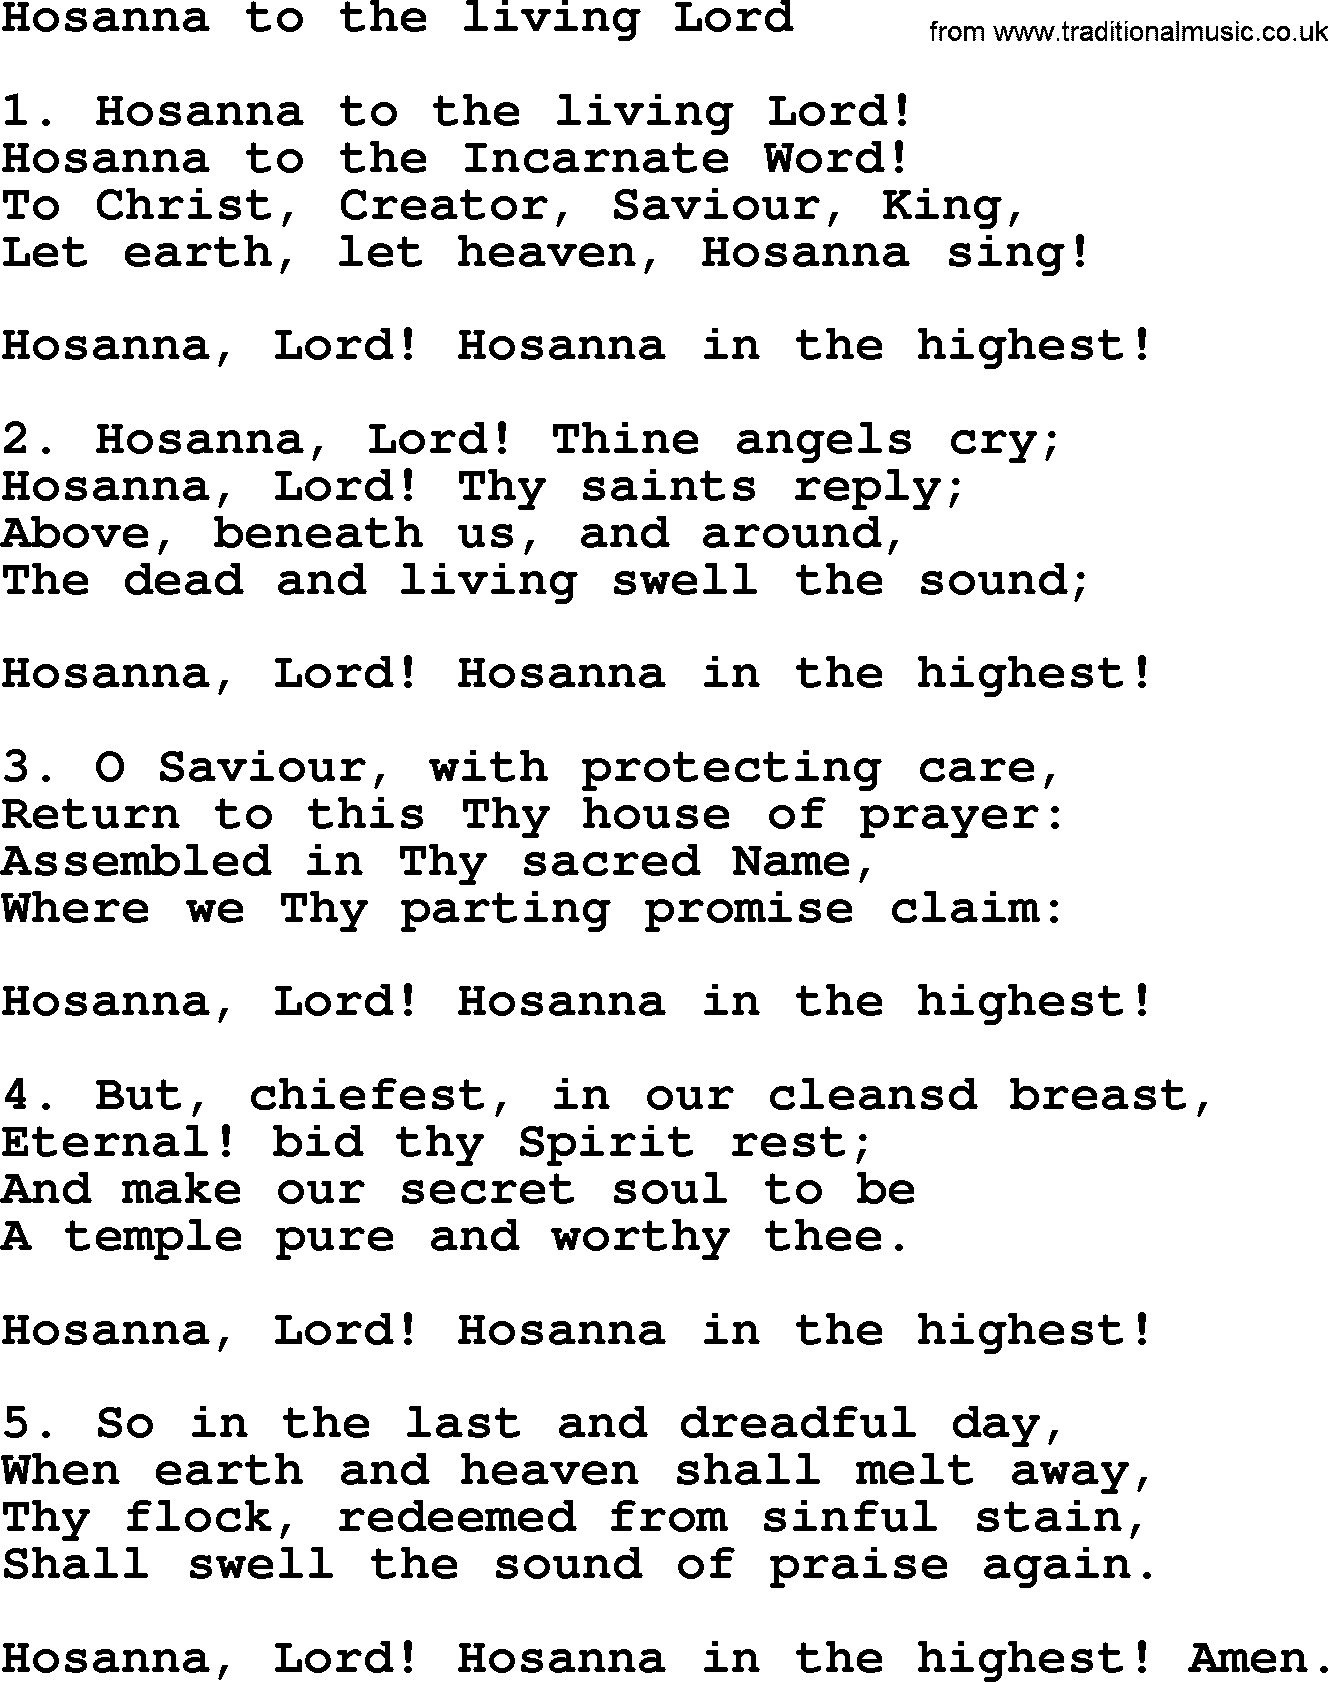 Advent Hymns Song Hosanna To The Living Lord Complete Lyrics And Pdf